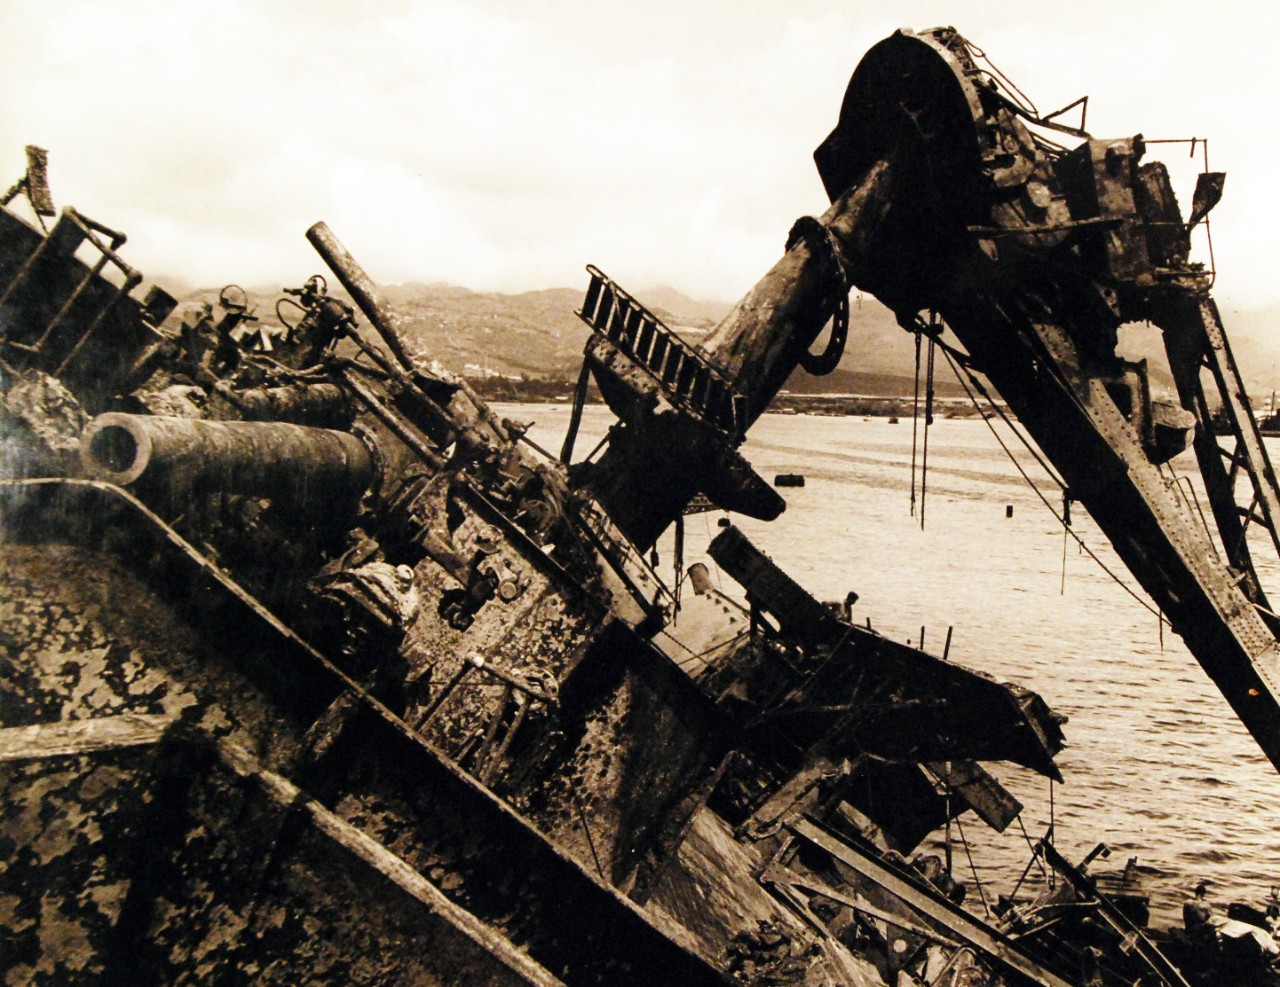 80-G-41616:  Pearl Harbor Attack, December 7, 1941.      Damaged USS Oklahoma (BB-37) raised after capsizing.  Shown:  Corrosion on superstructure.     Photograph released May 23, 1943.  Official U.S. Navy Photograph, now in the collections of the National Archives. (2016/10/11).    